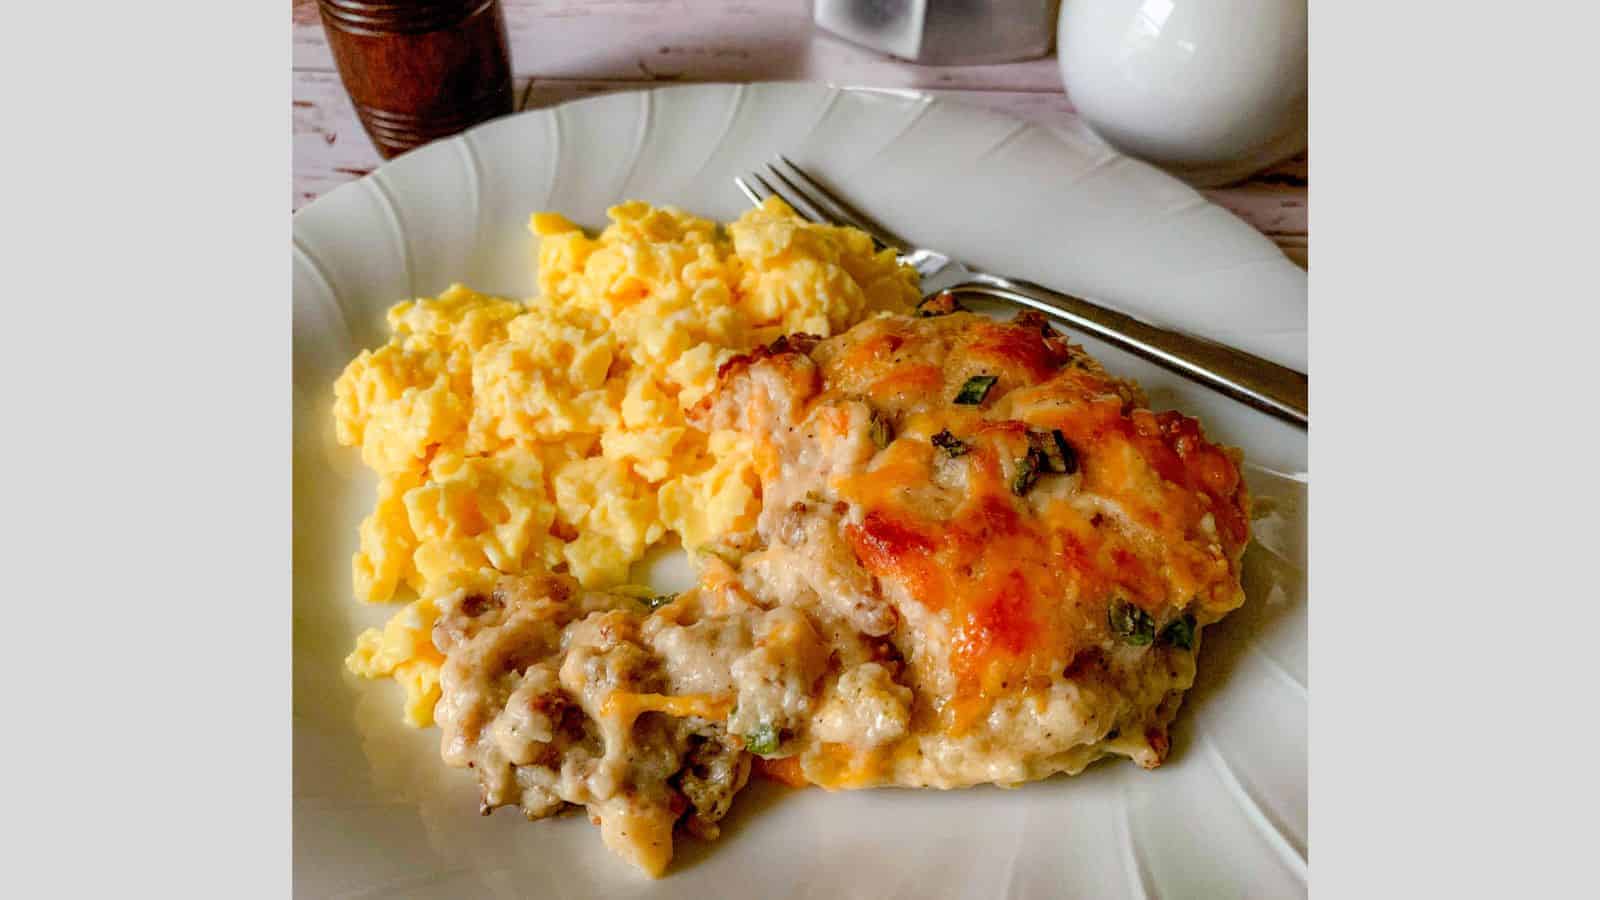 A plate loaded with biscuit and sausage gravy casserole and scrambled eggs.